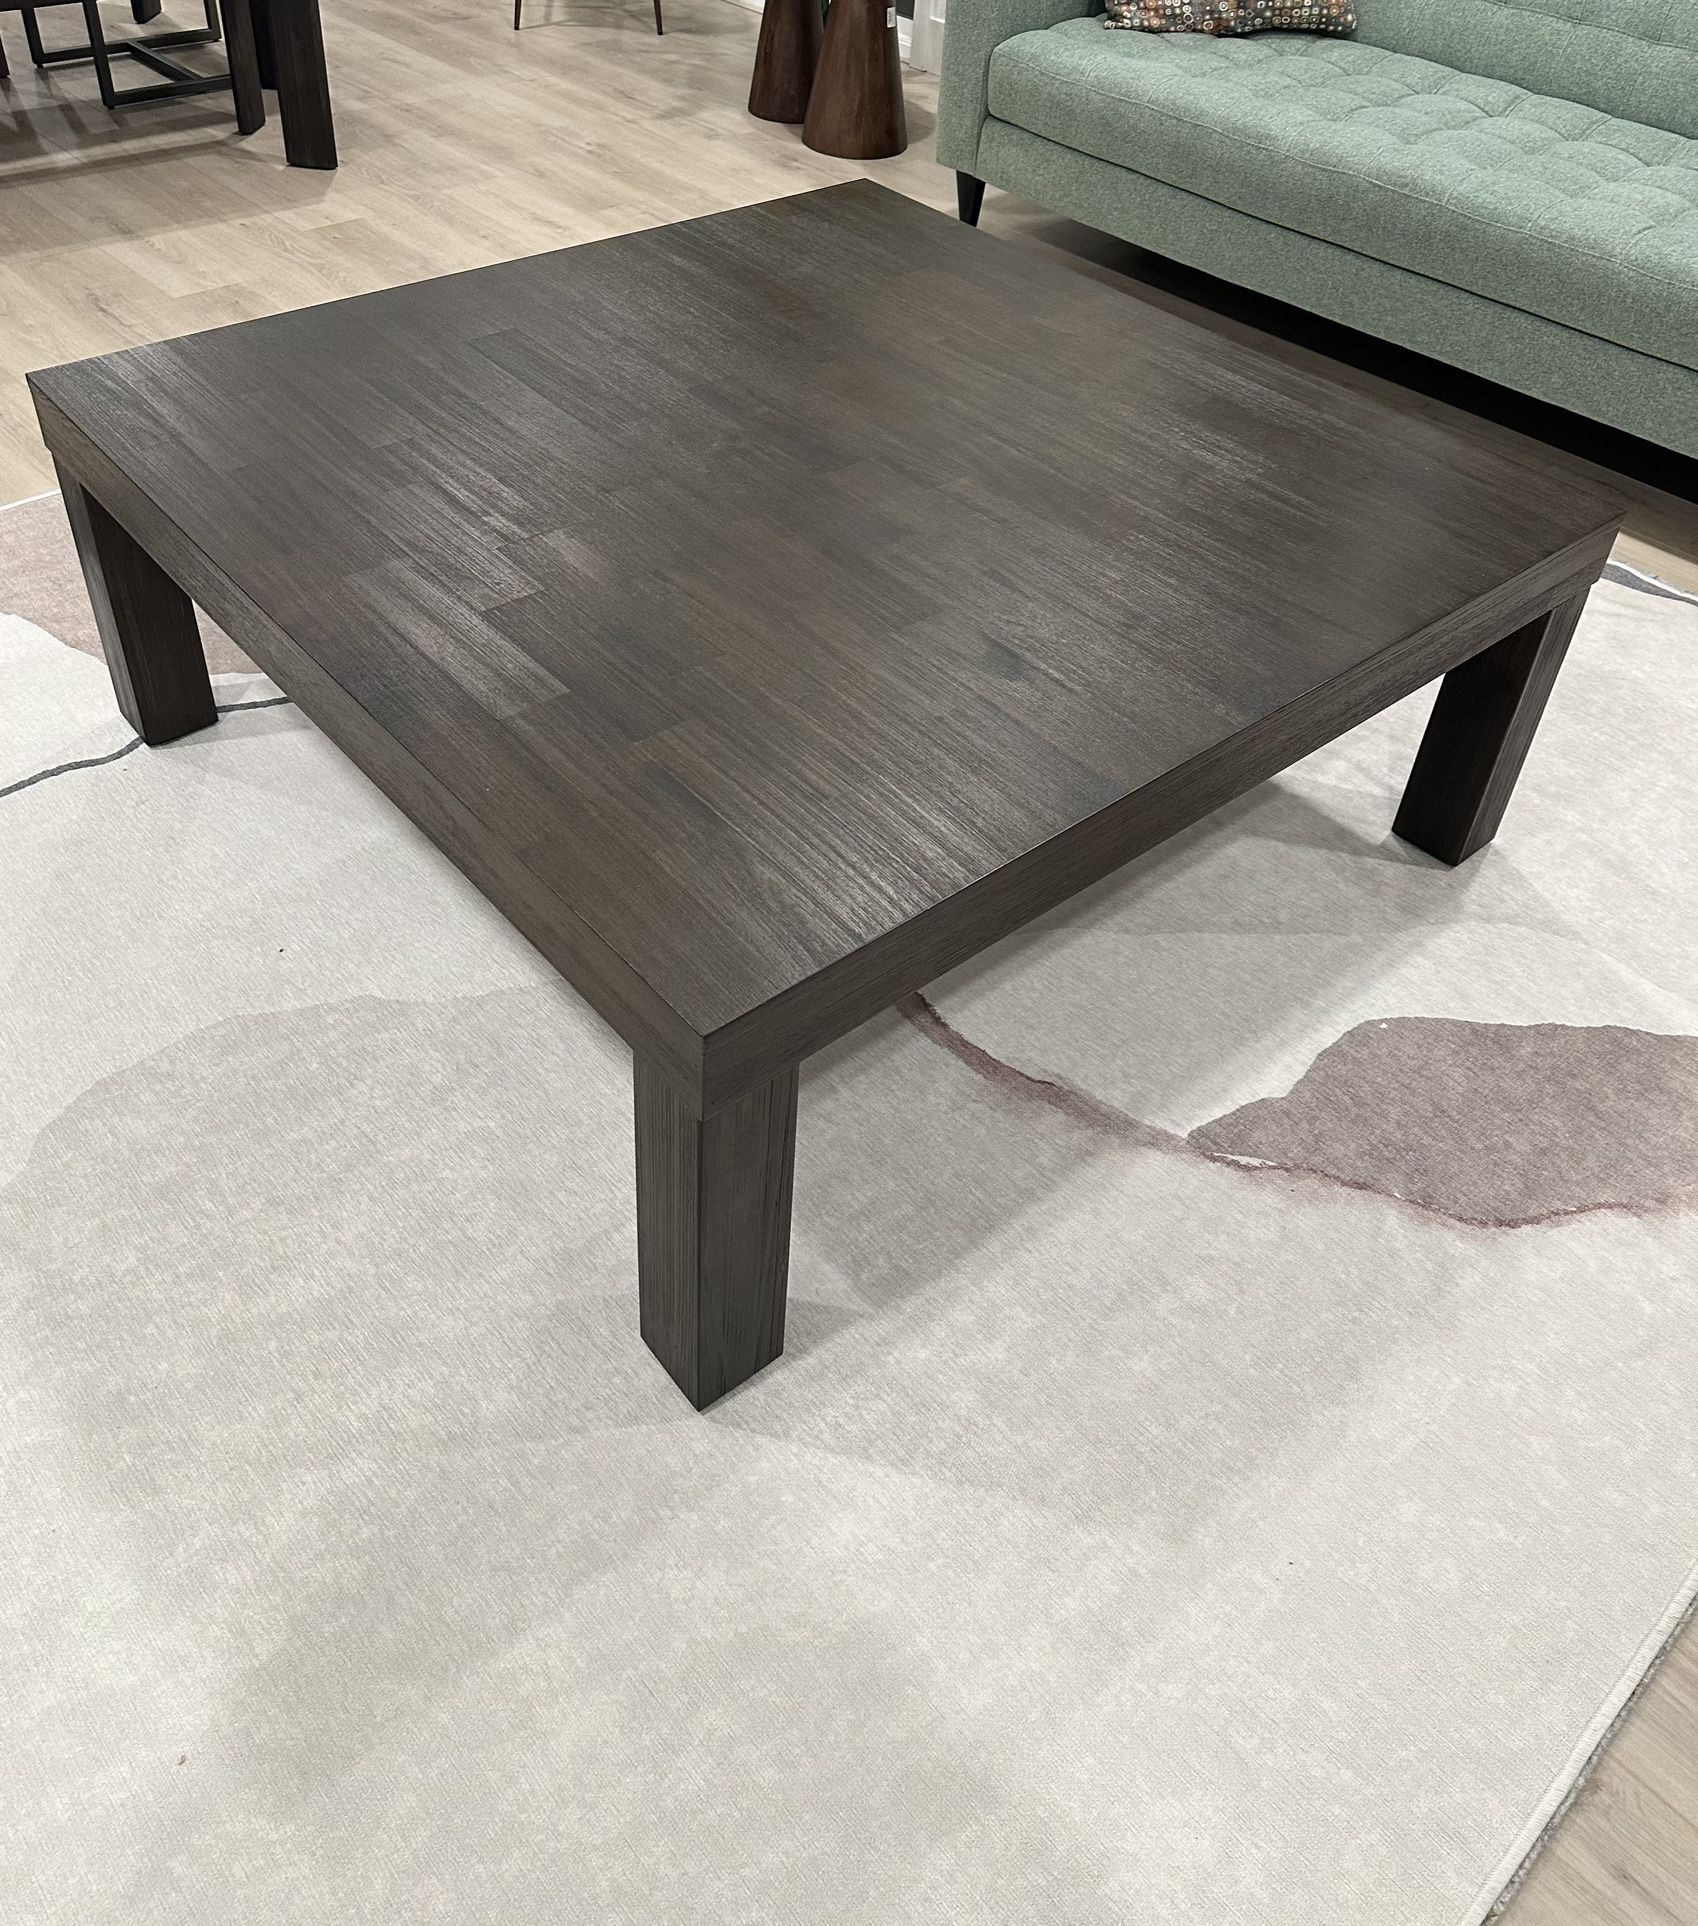 Large Coffee table For Large living Room